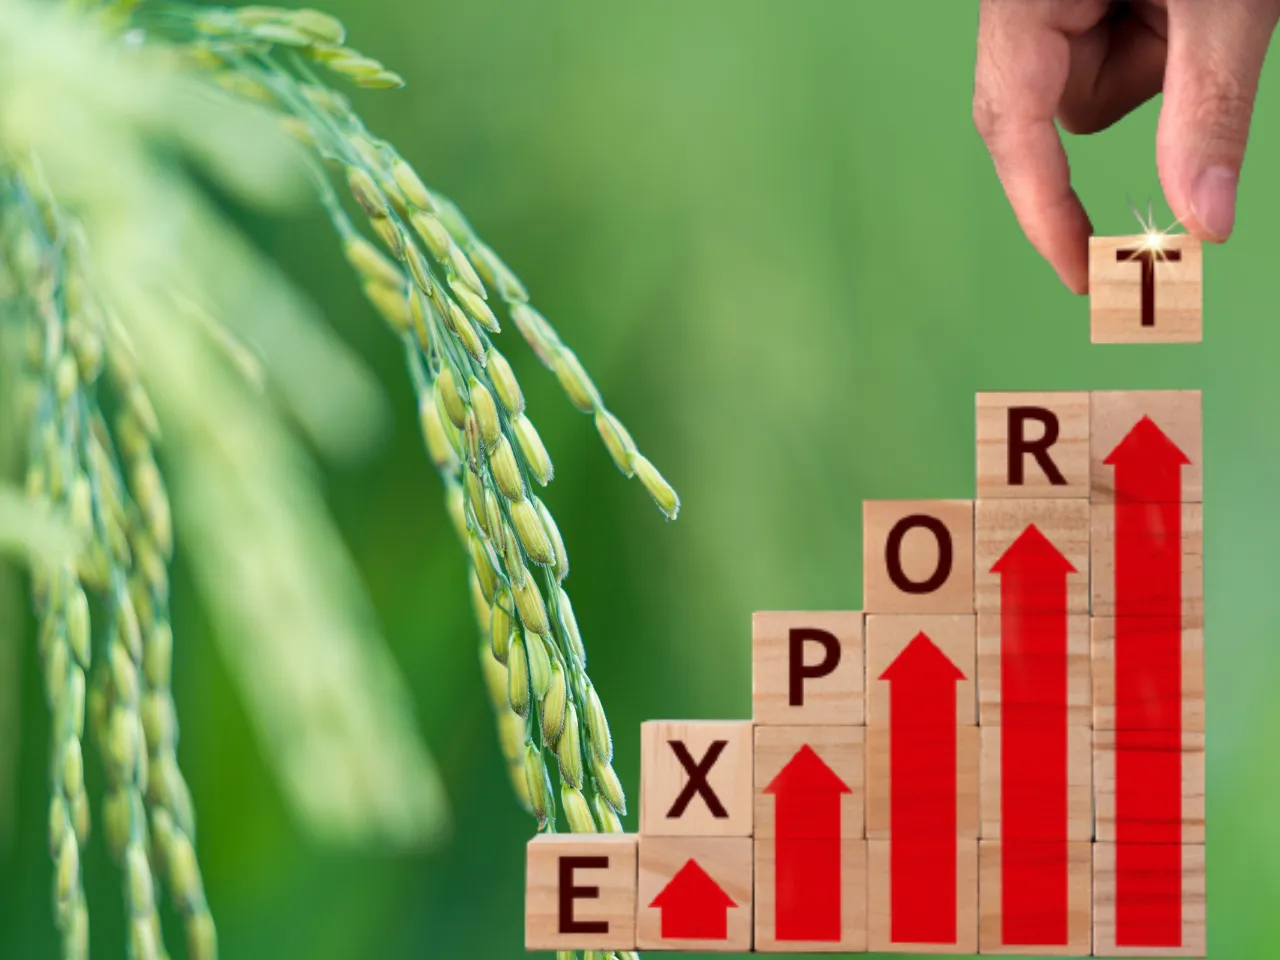 India's Agricultural and processed food products exports up by 16%